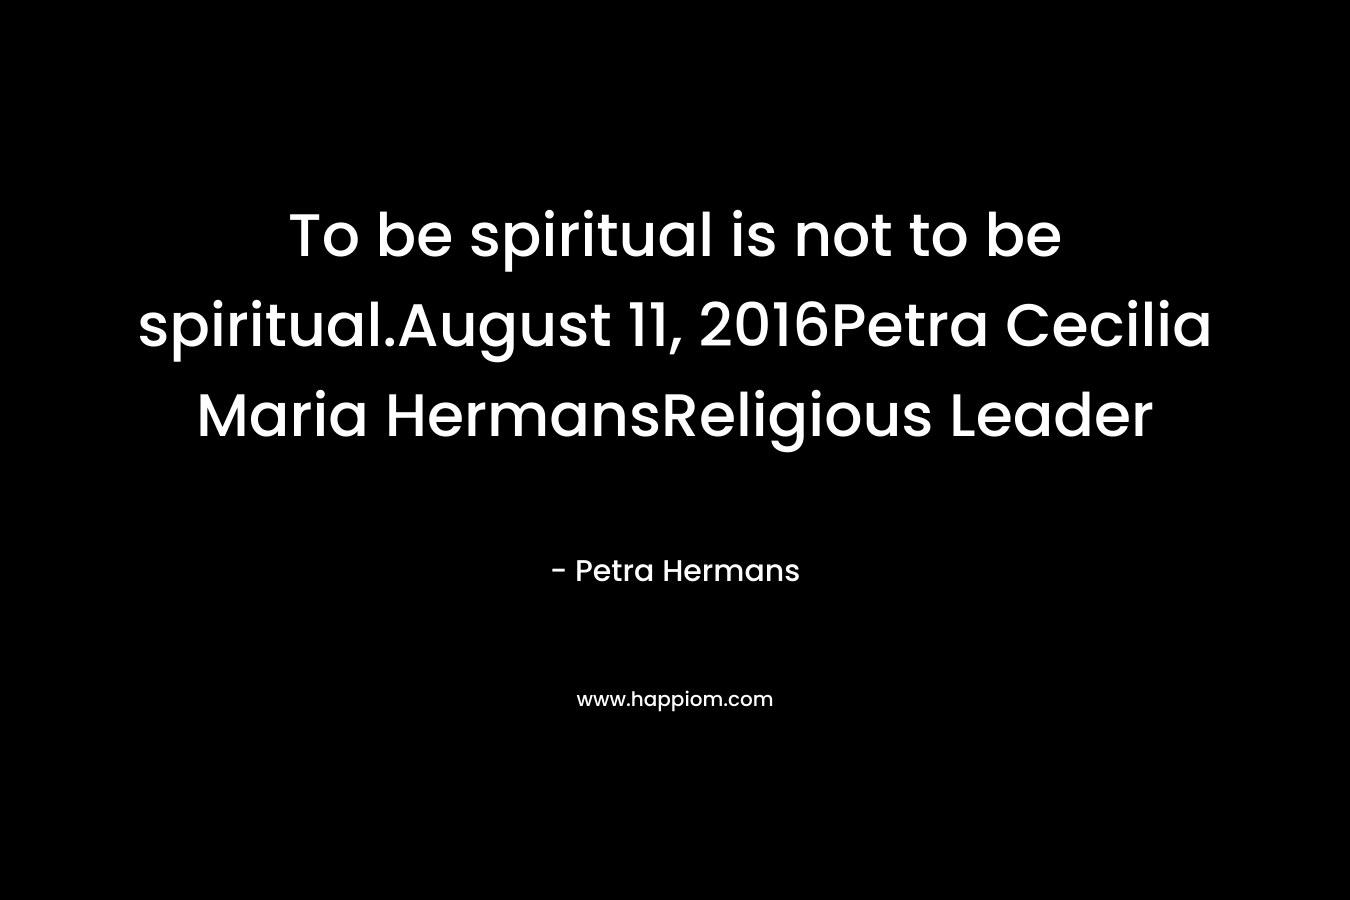 To be spiritual is not to be spiritual.August 11, 2016Petra Cecilia Maria HermansReligious Leader